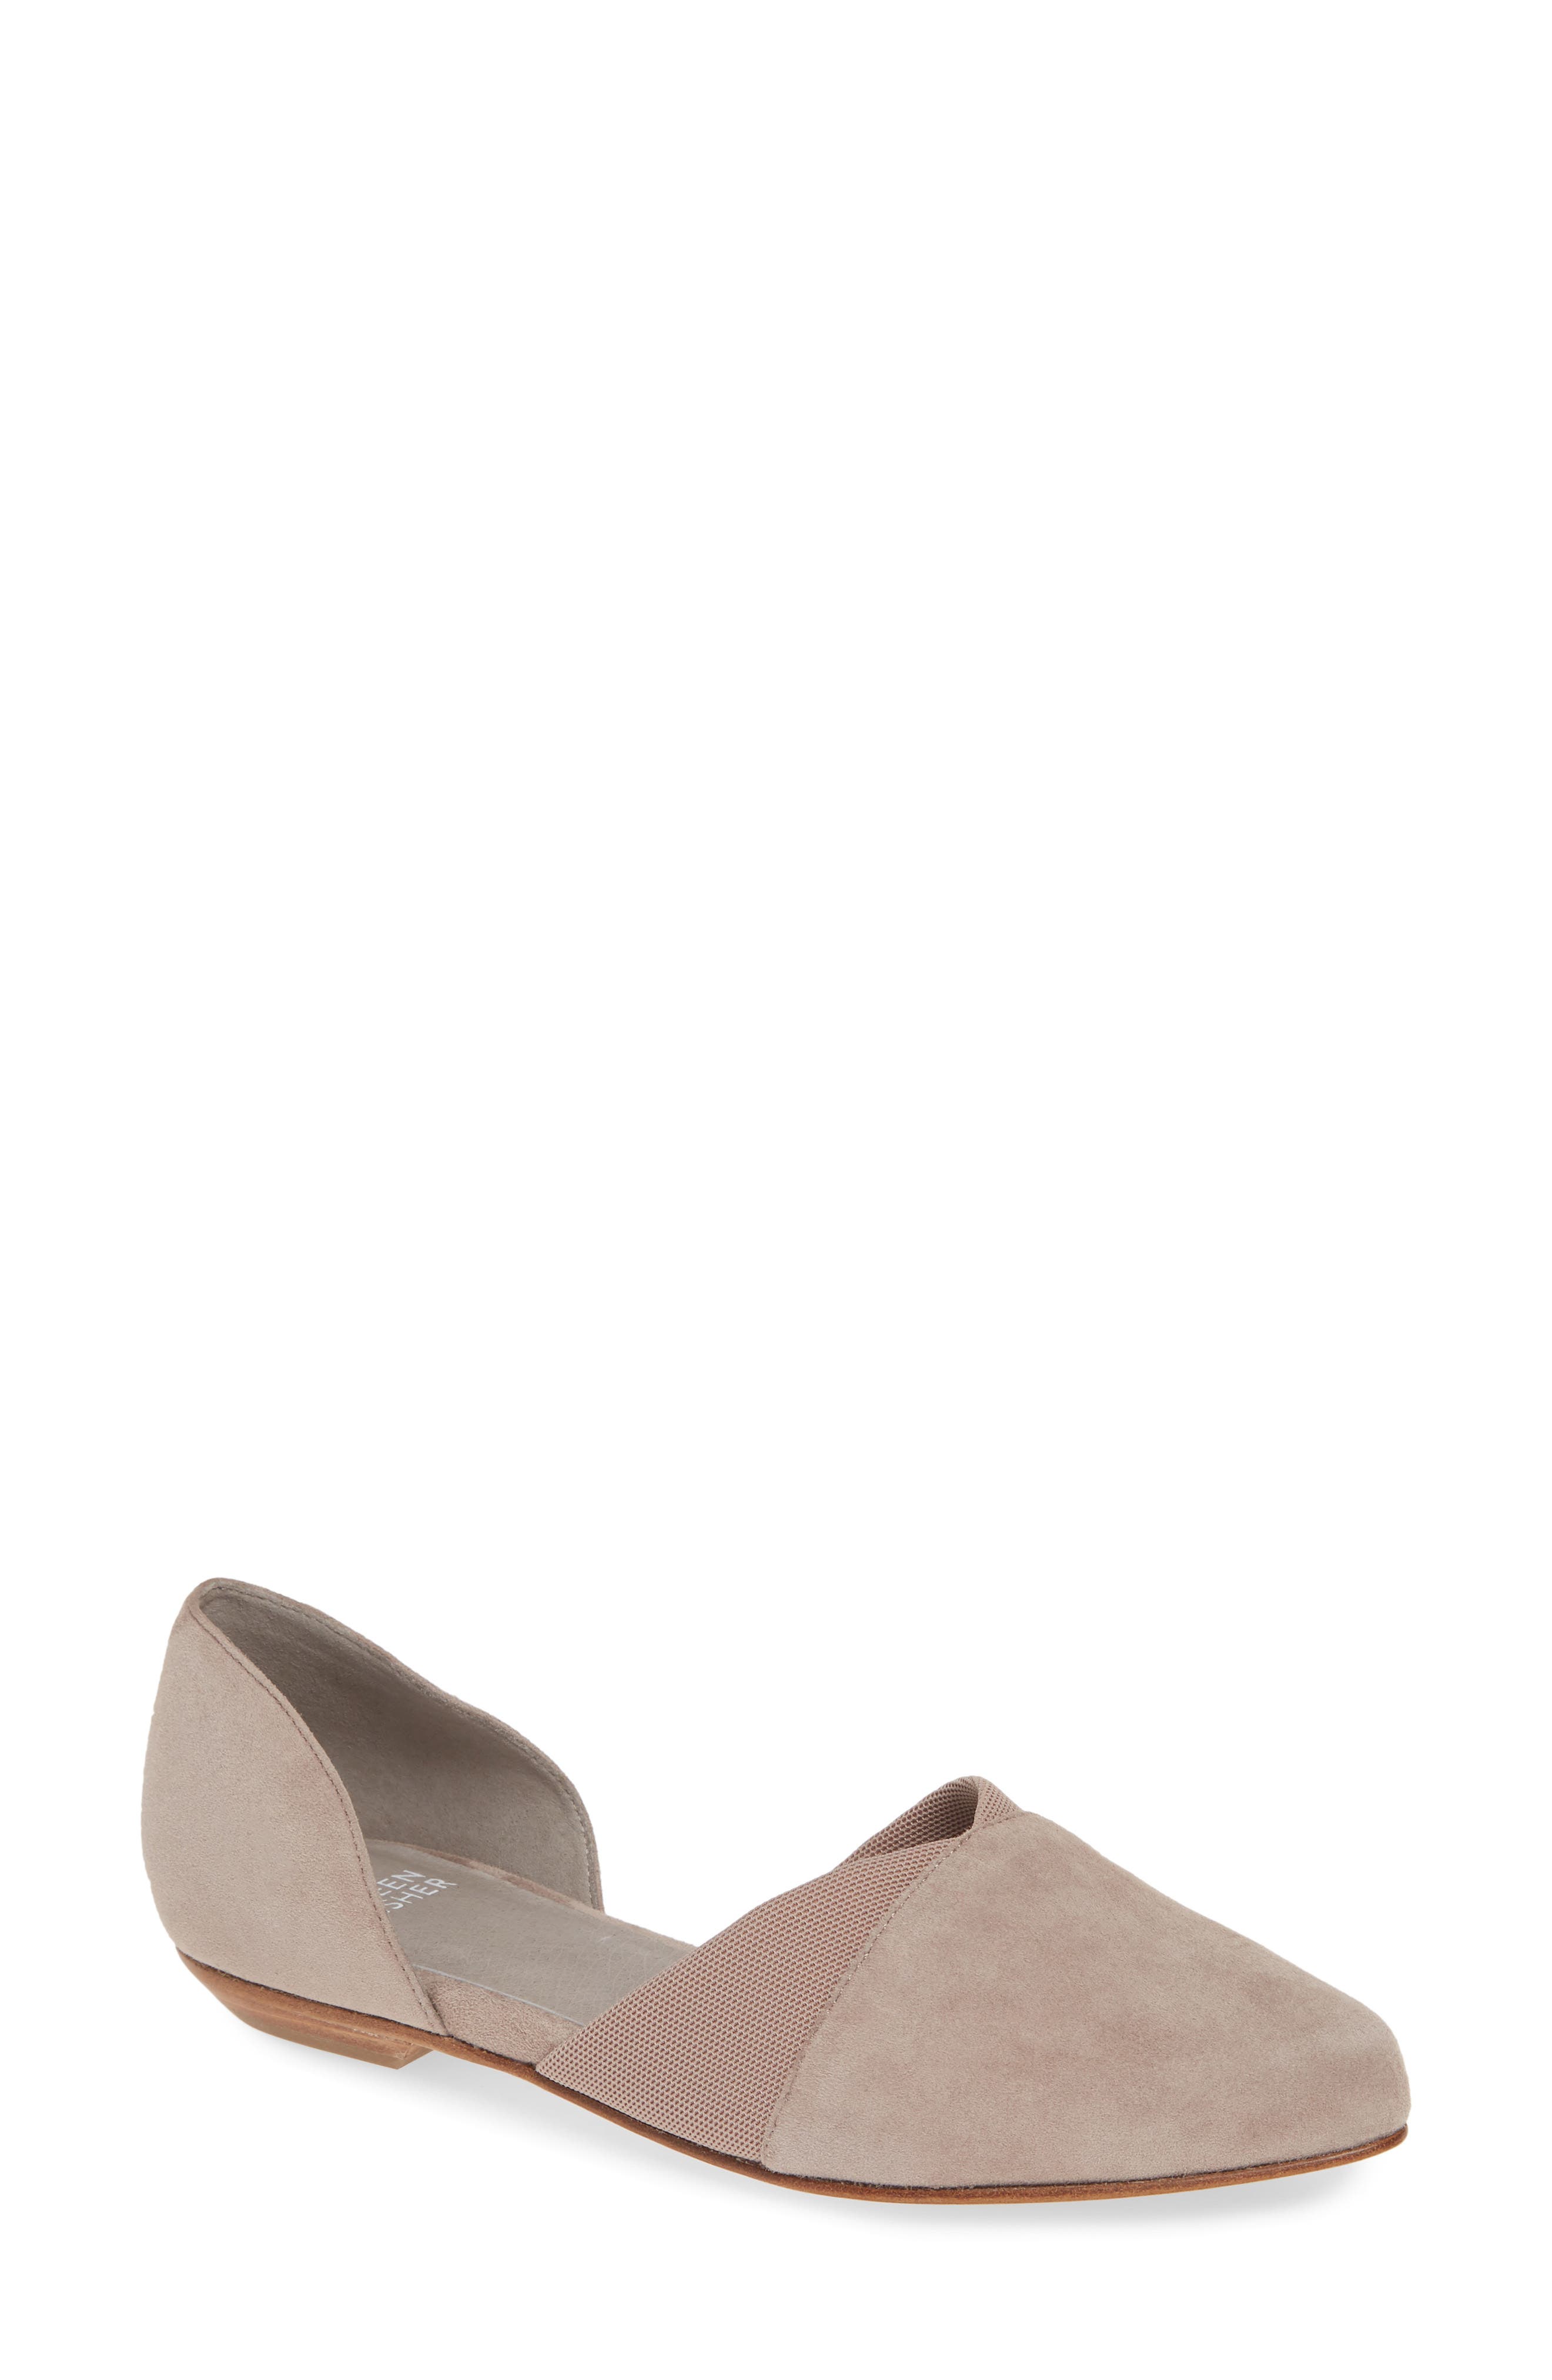 nordstrom eileen fisher shoes